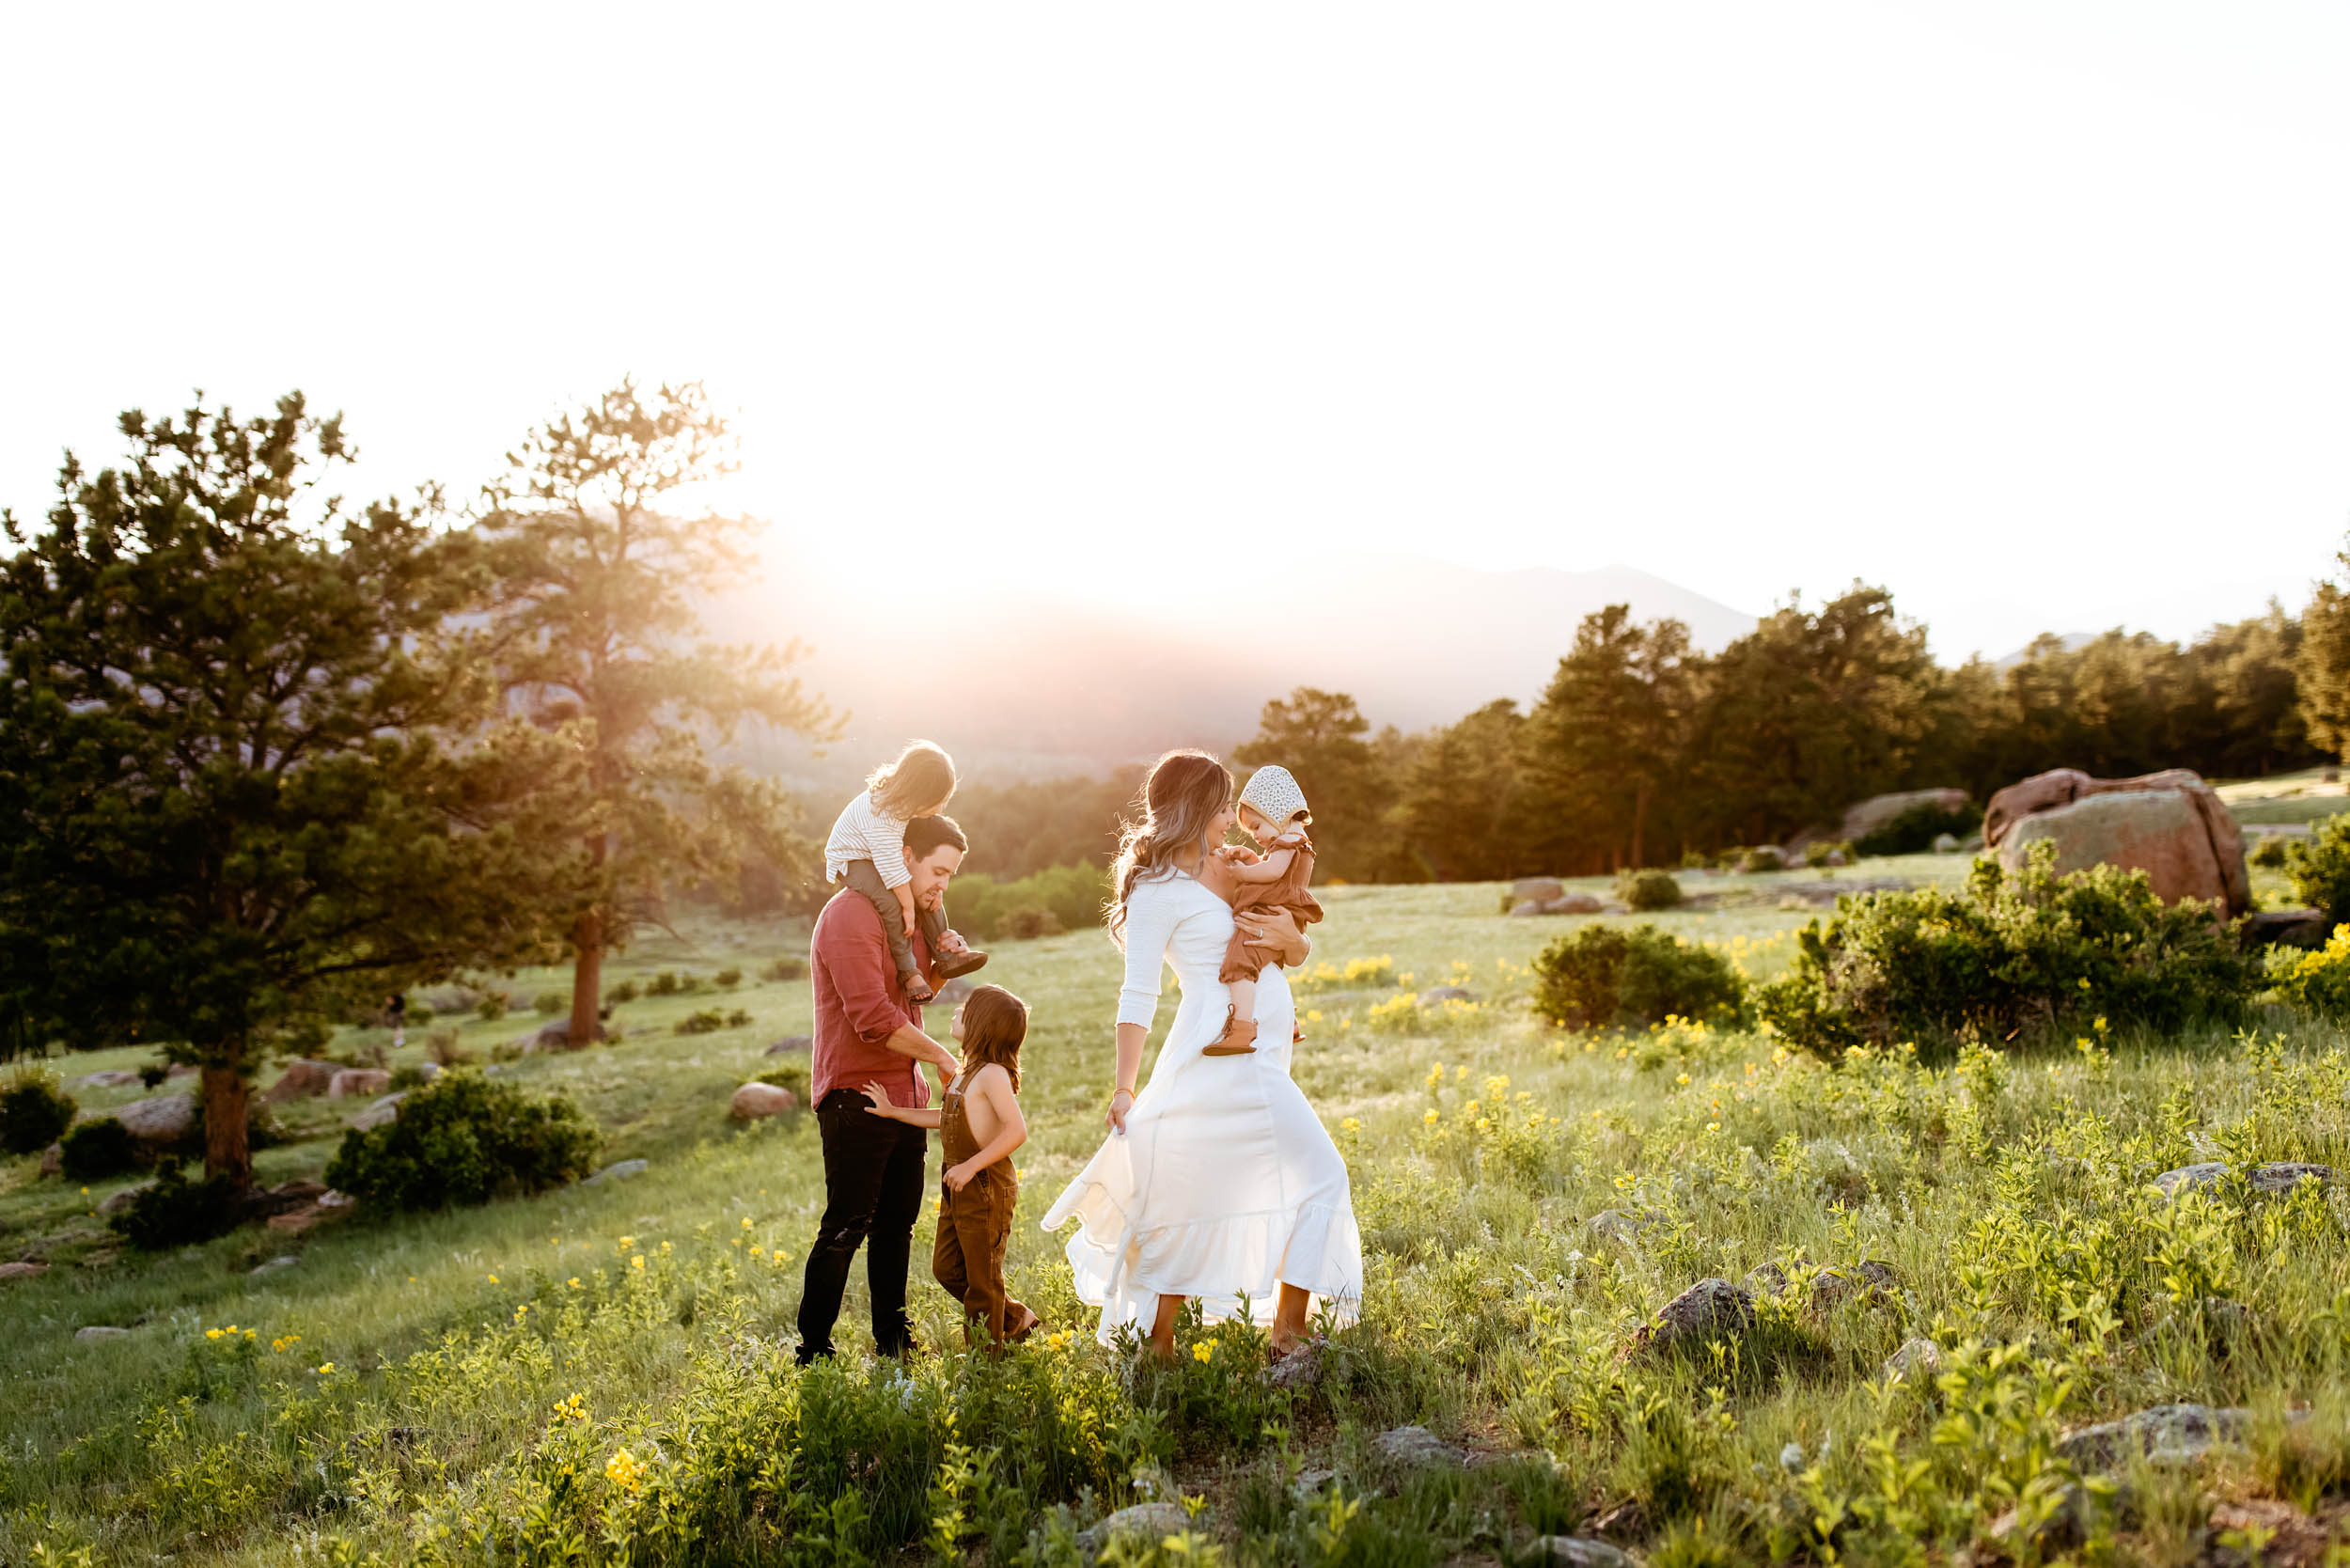 Colorado Springs Photography Session